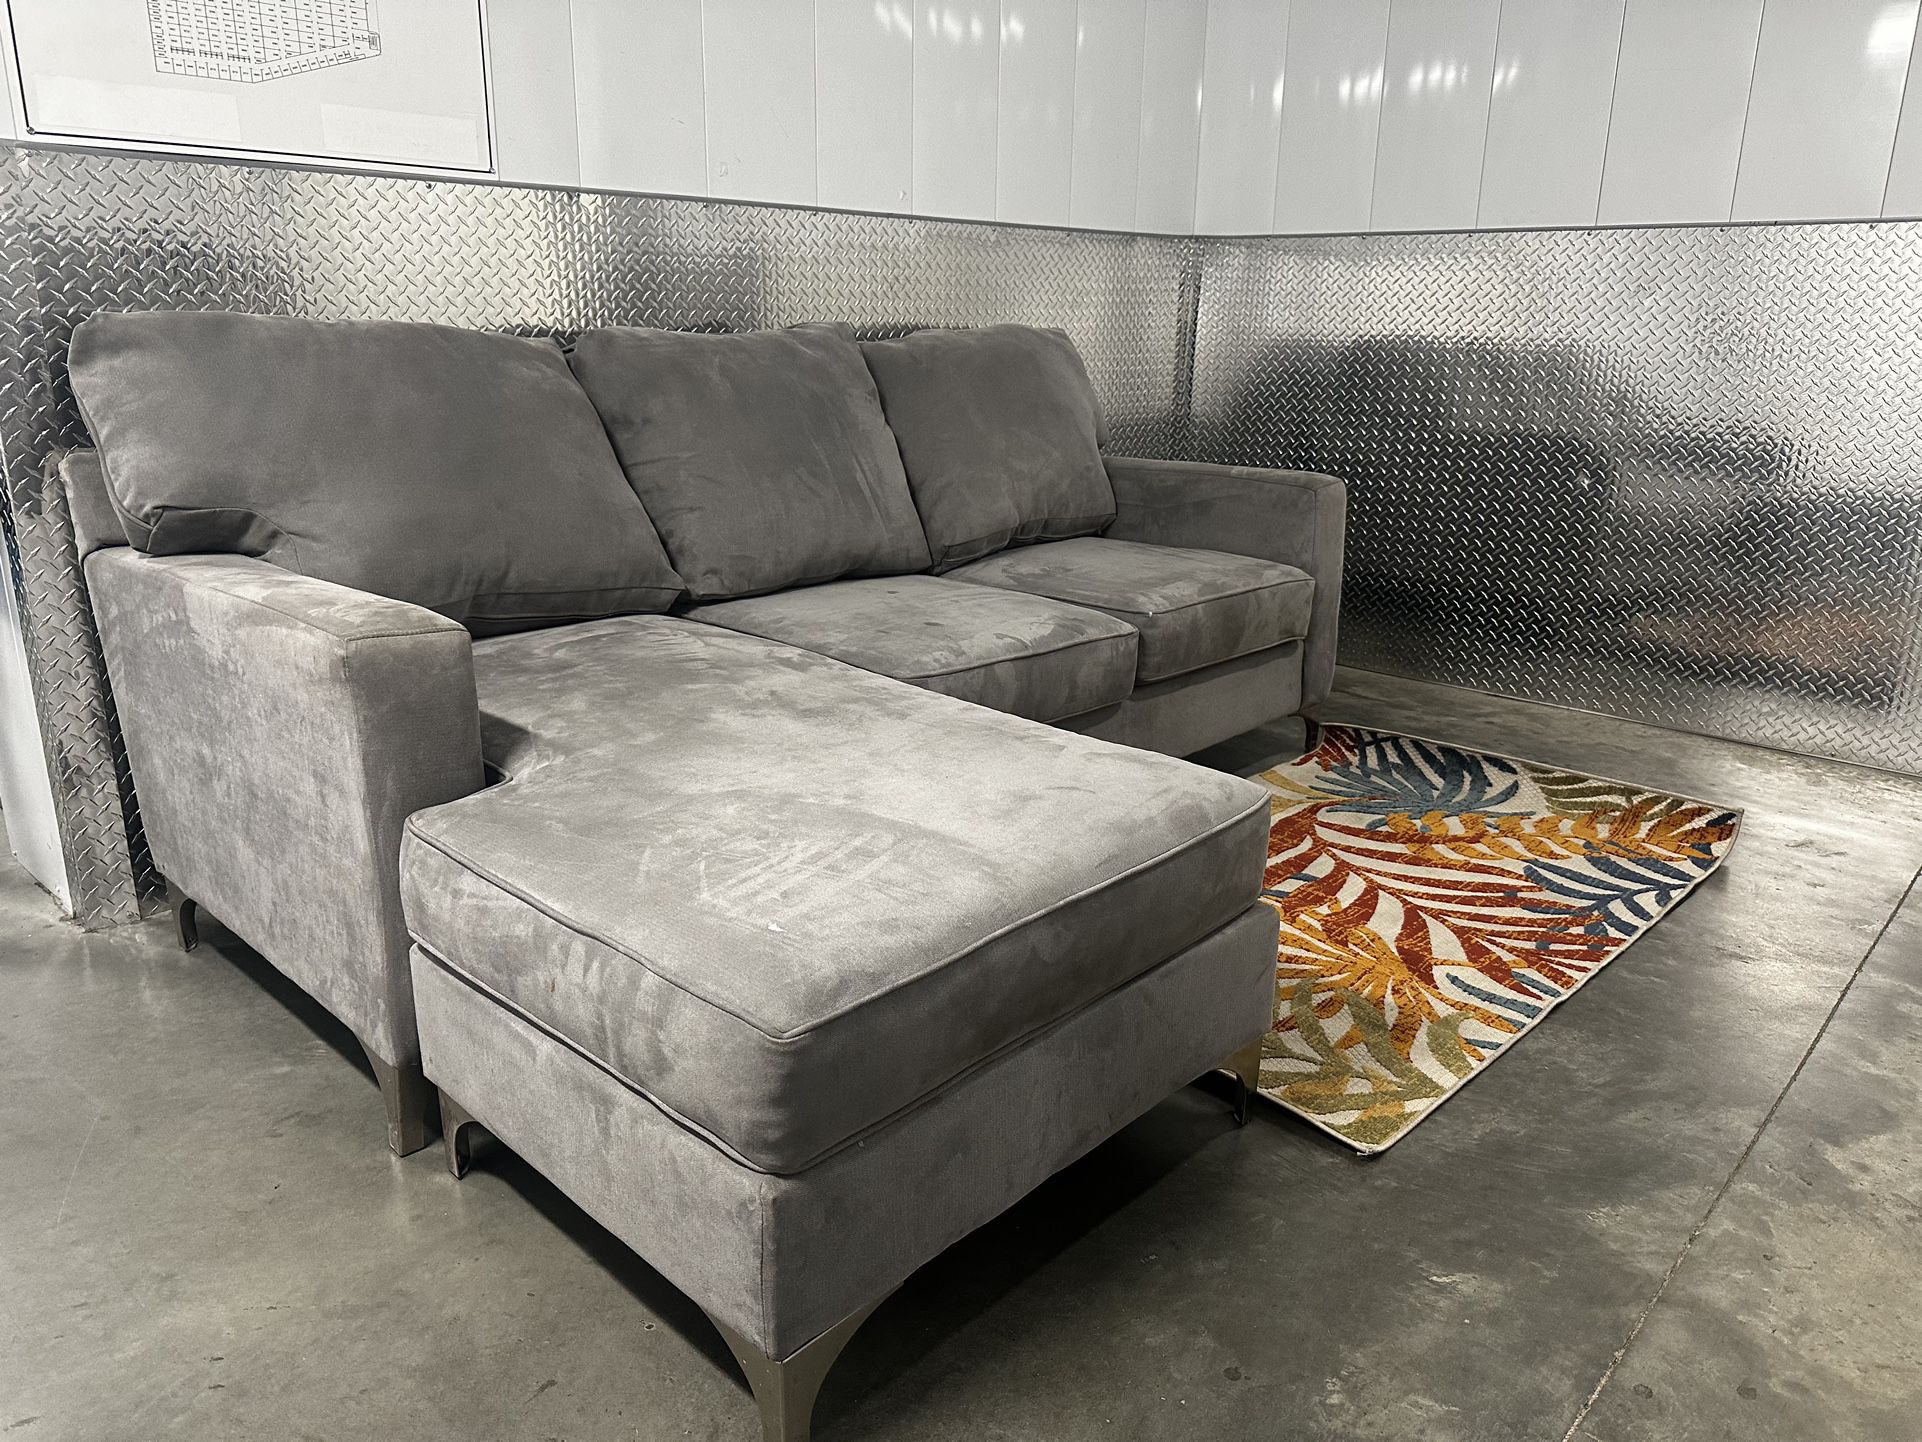 LIGHT GREY SECTIONAL COUCH W/ FREE DELIVERY 